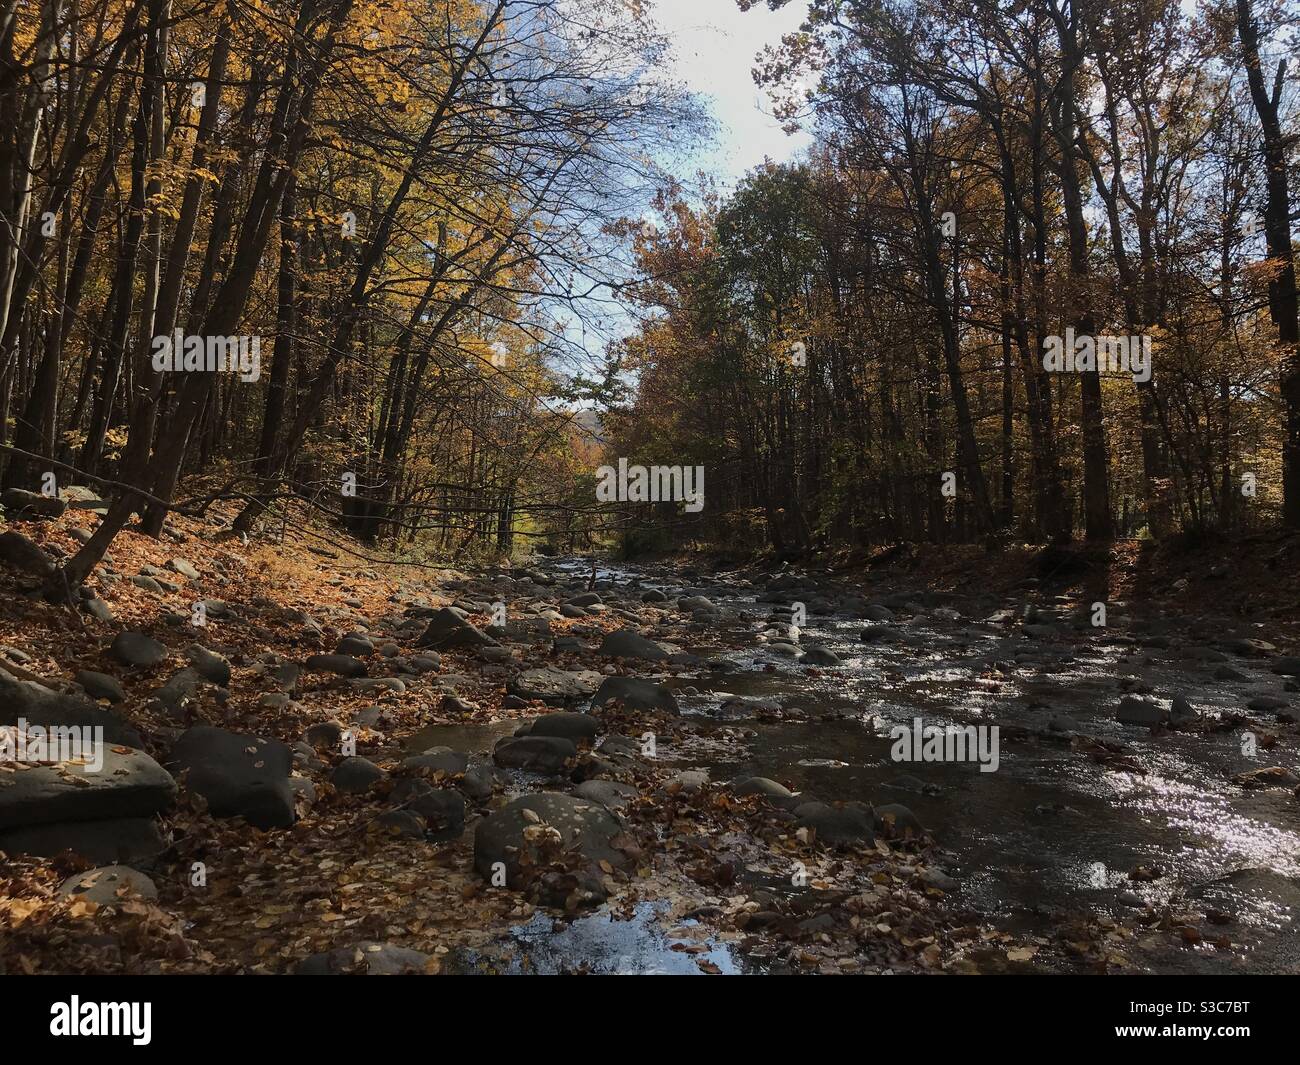 Sawkill Creek on an autumn day in Woodstock, NY. Stock Photo